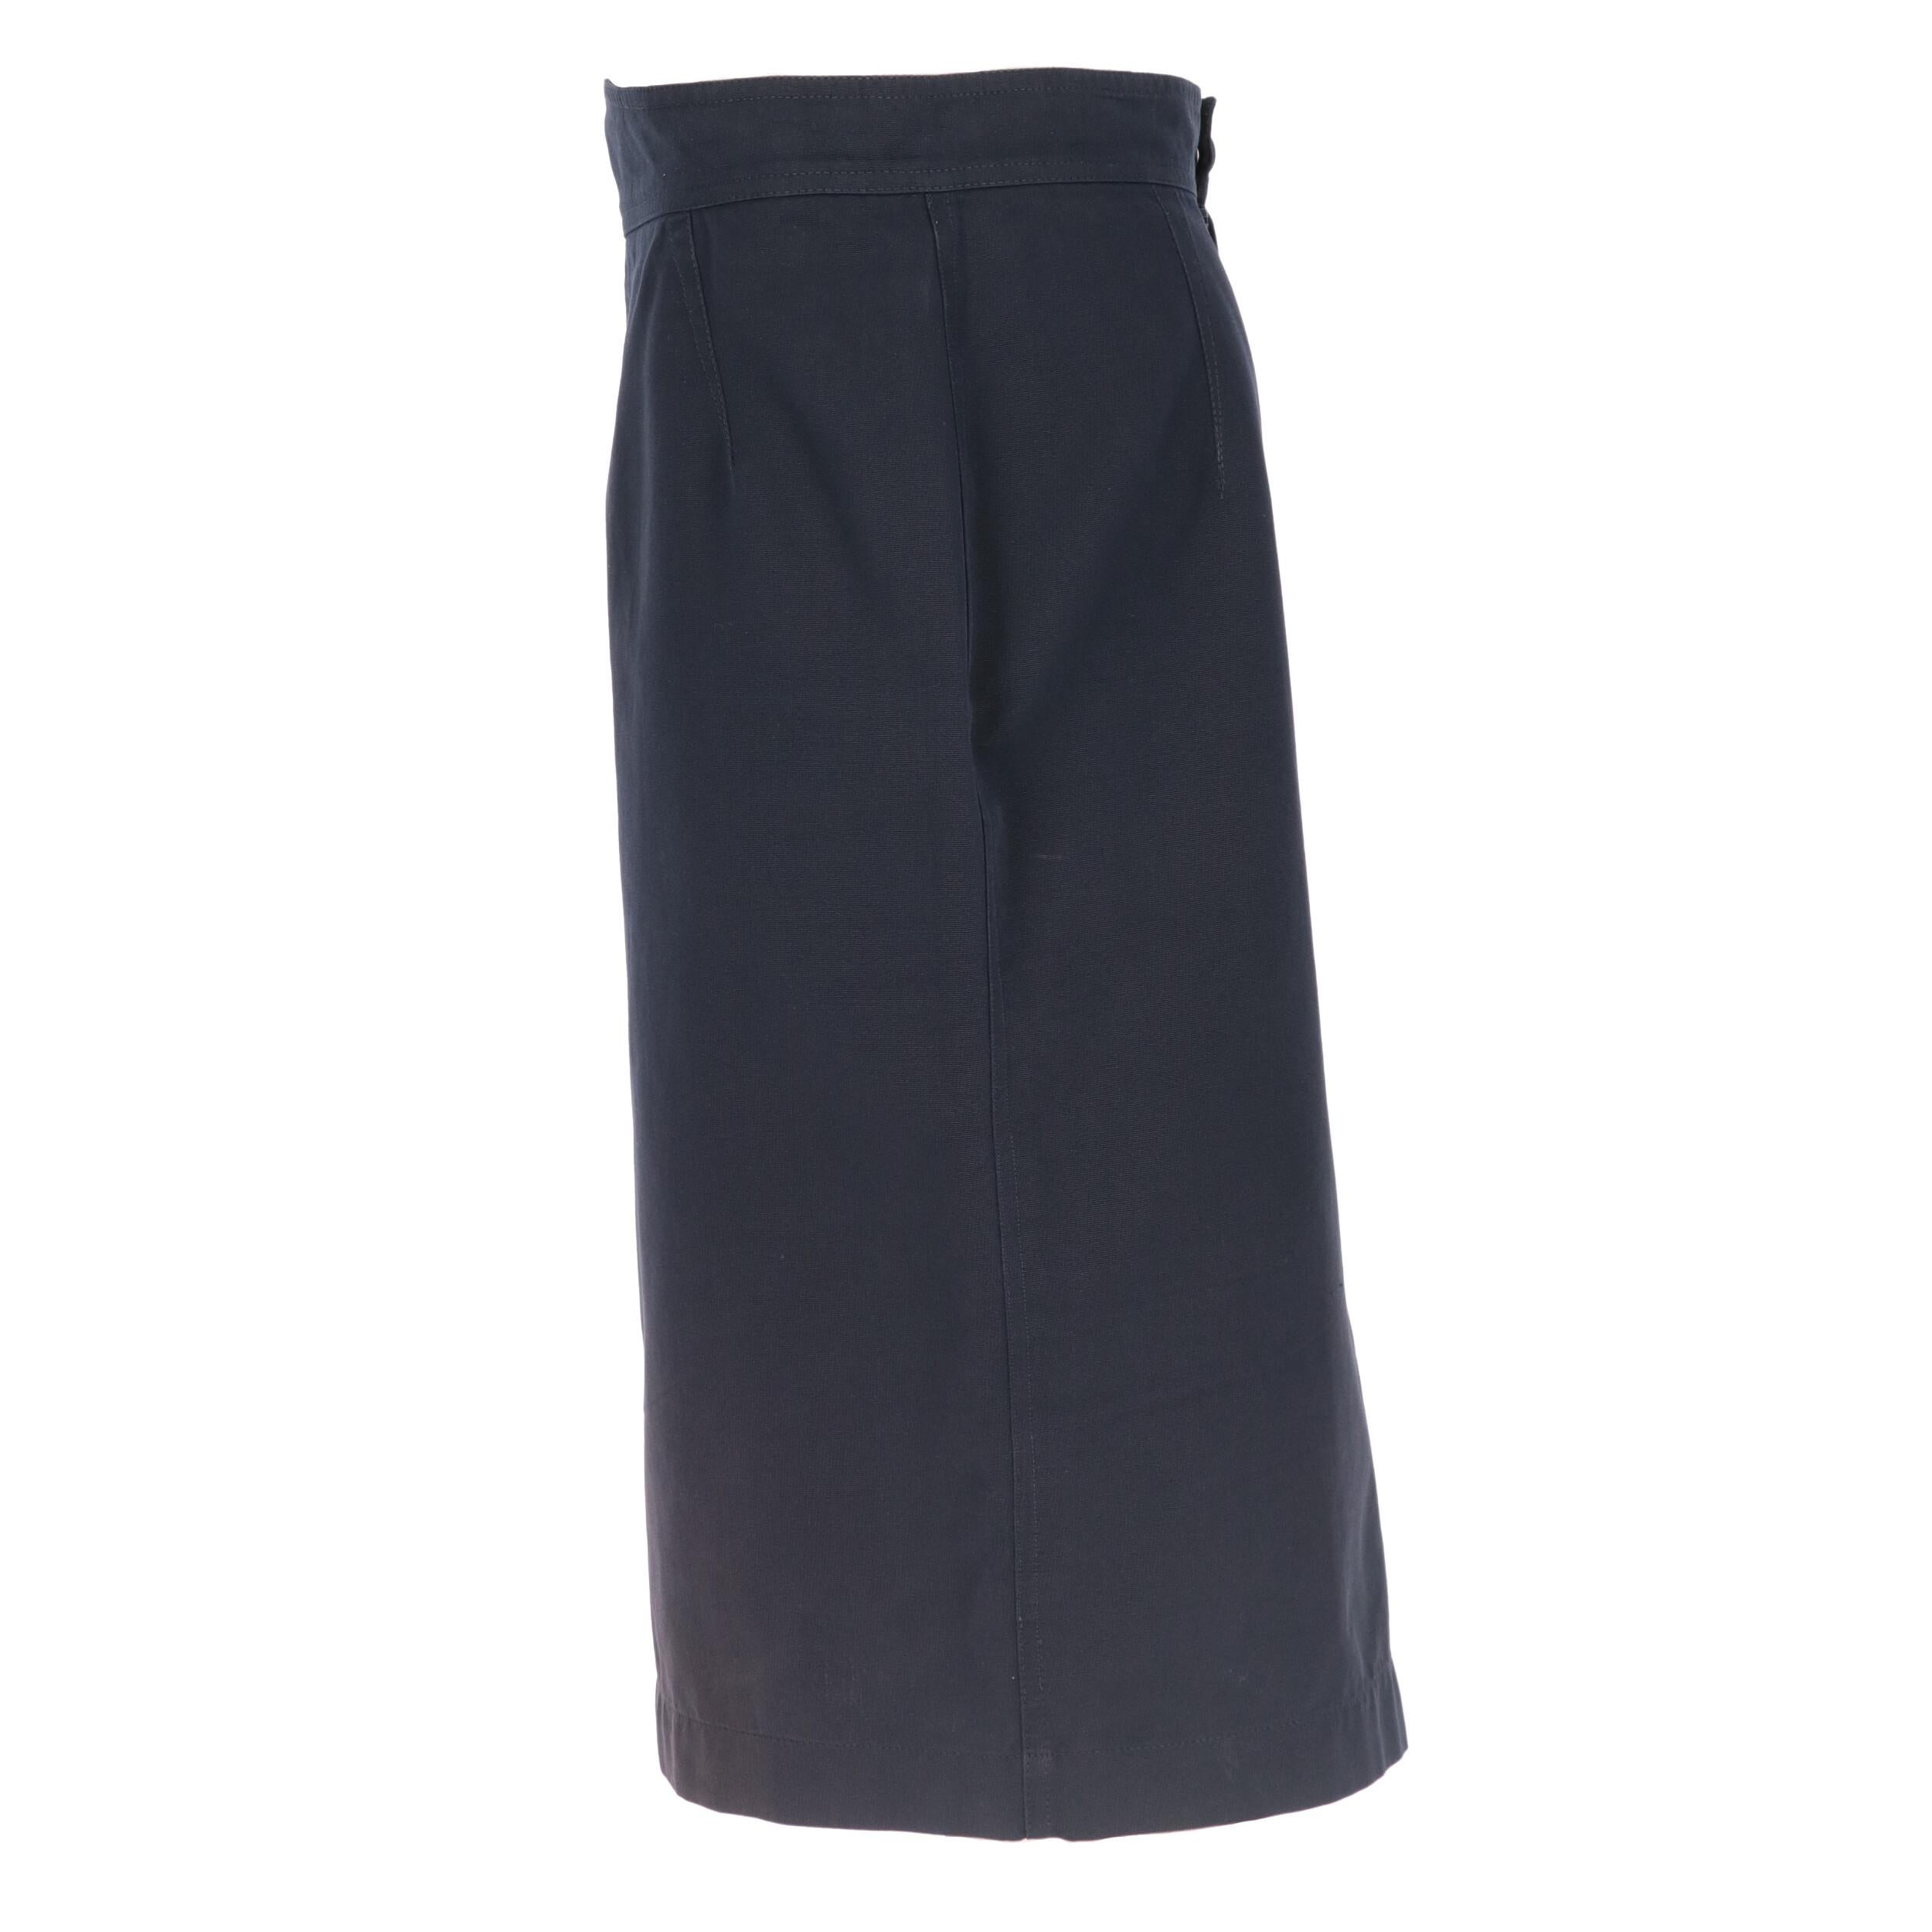 Thierry Mugler blue cotton skirt, back closure with snap button and zip and slit on the back.

The product shows slight discolorations as shown in the pictures.
Years: 80s

Made in Italy

Size: 48 IT

Linear measures

Height: 61 cm
Waist: 40 cm